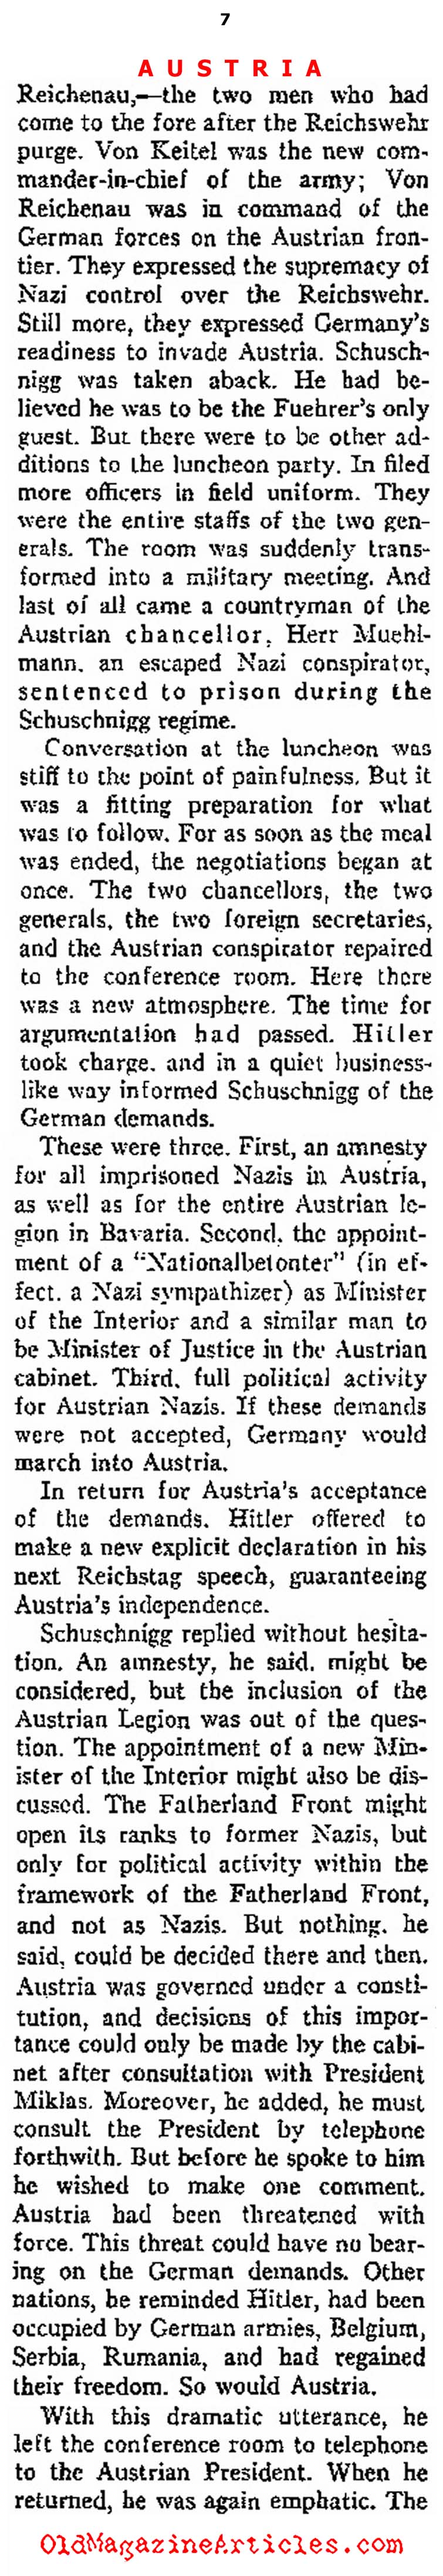 The Merger of Austria With Germany  (Ken Magazine, 1938)